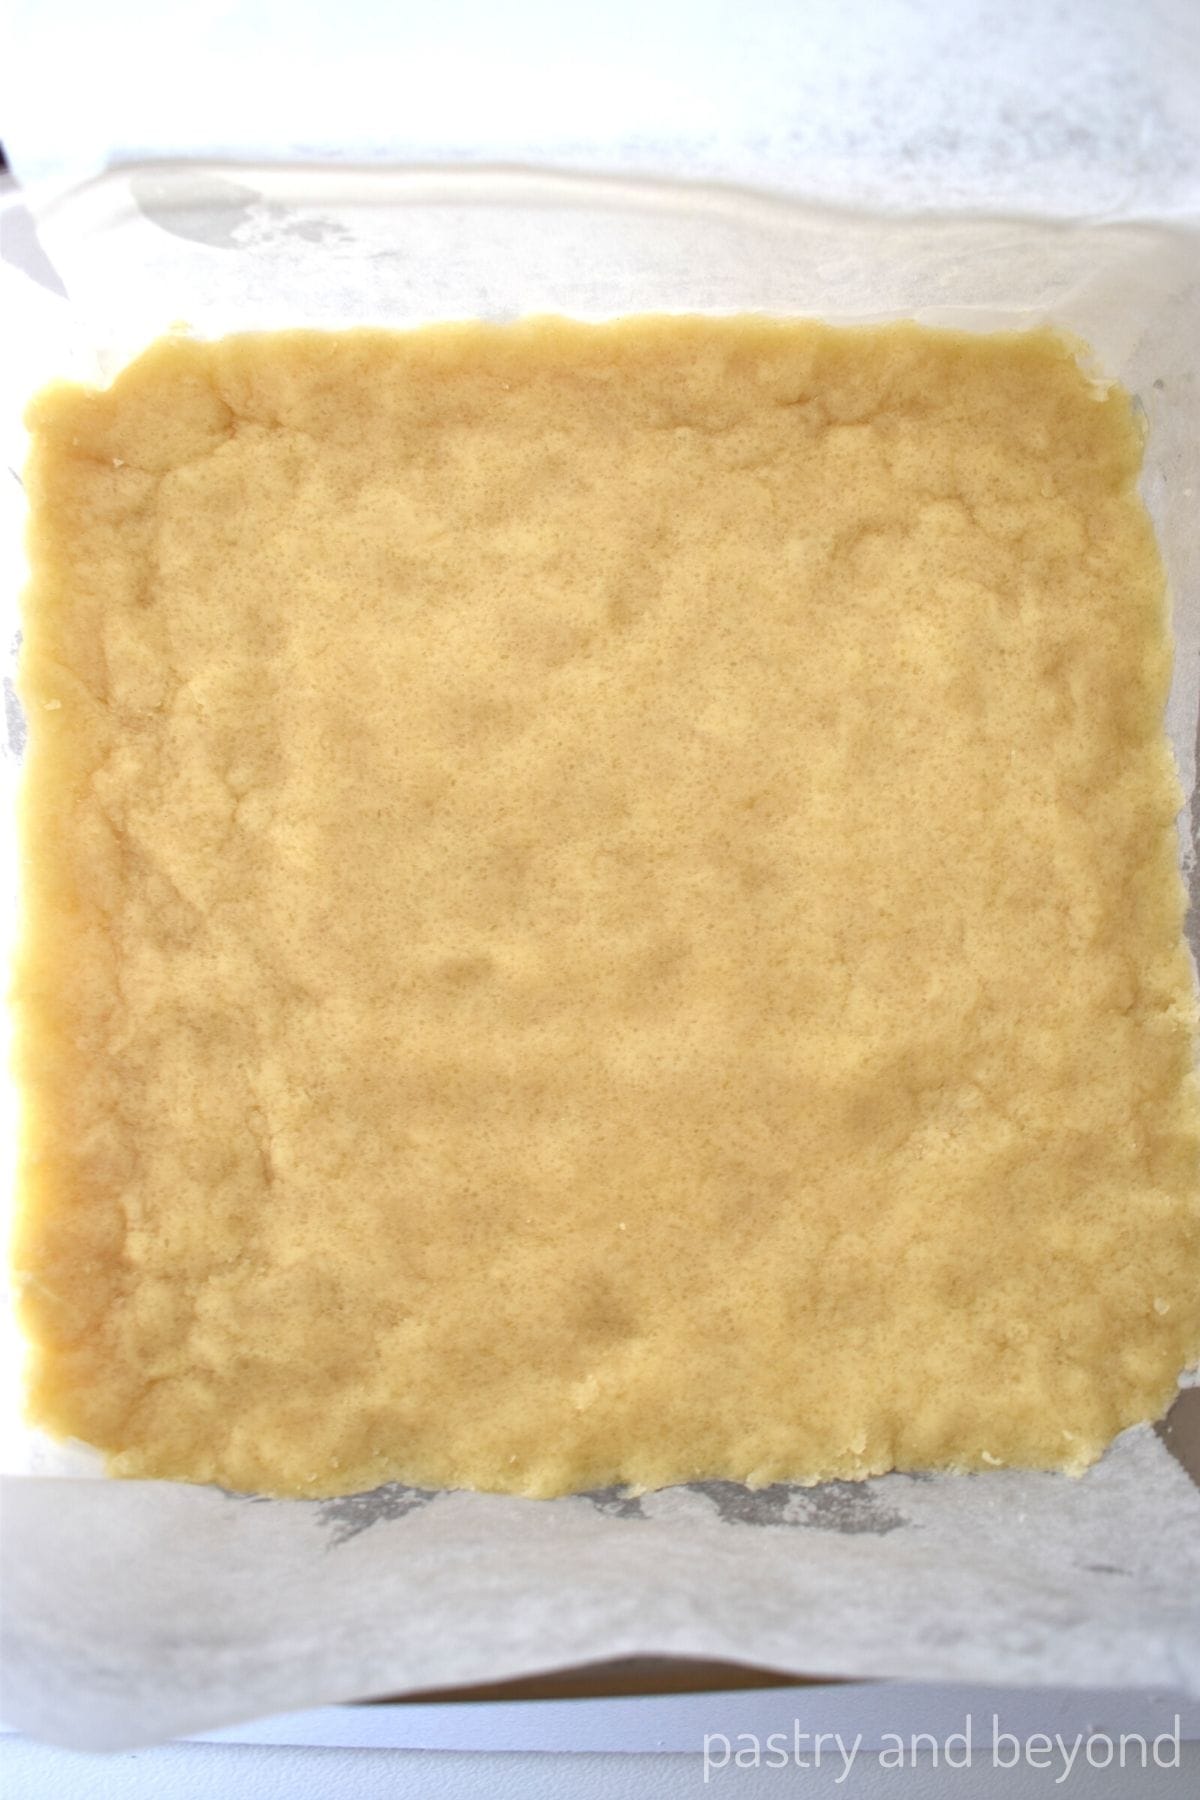 Crust dough lined in a pan.